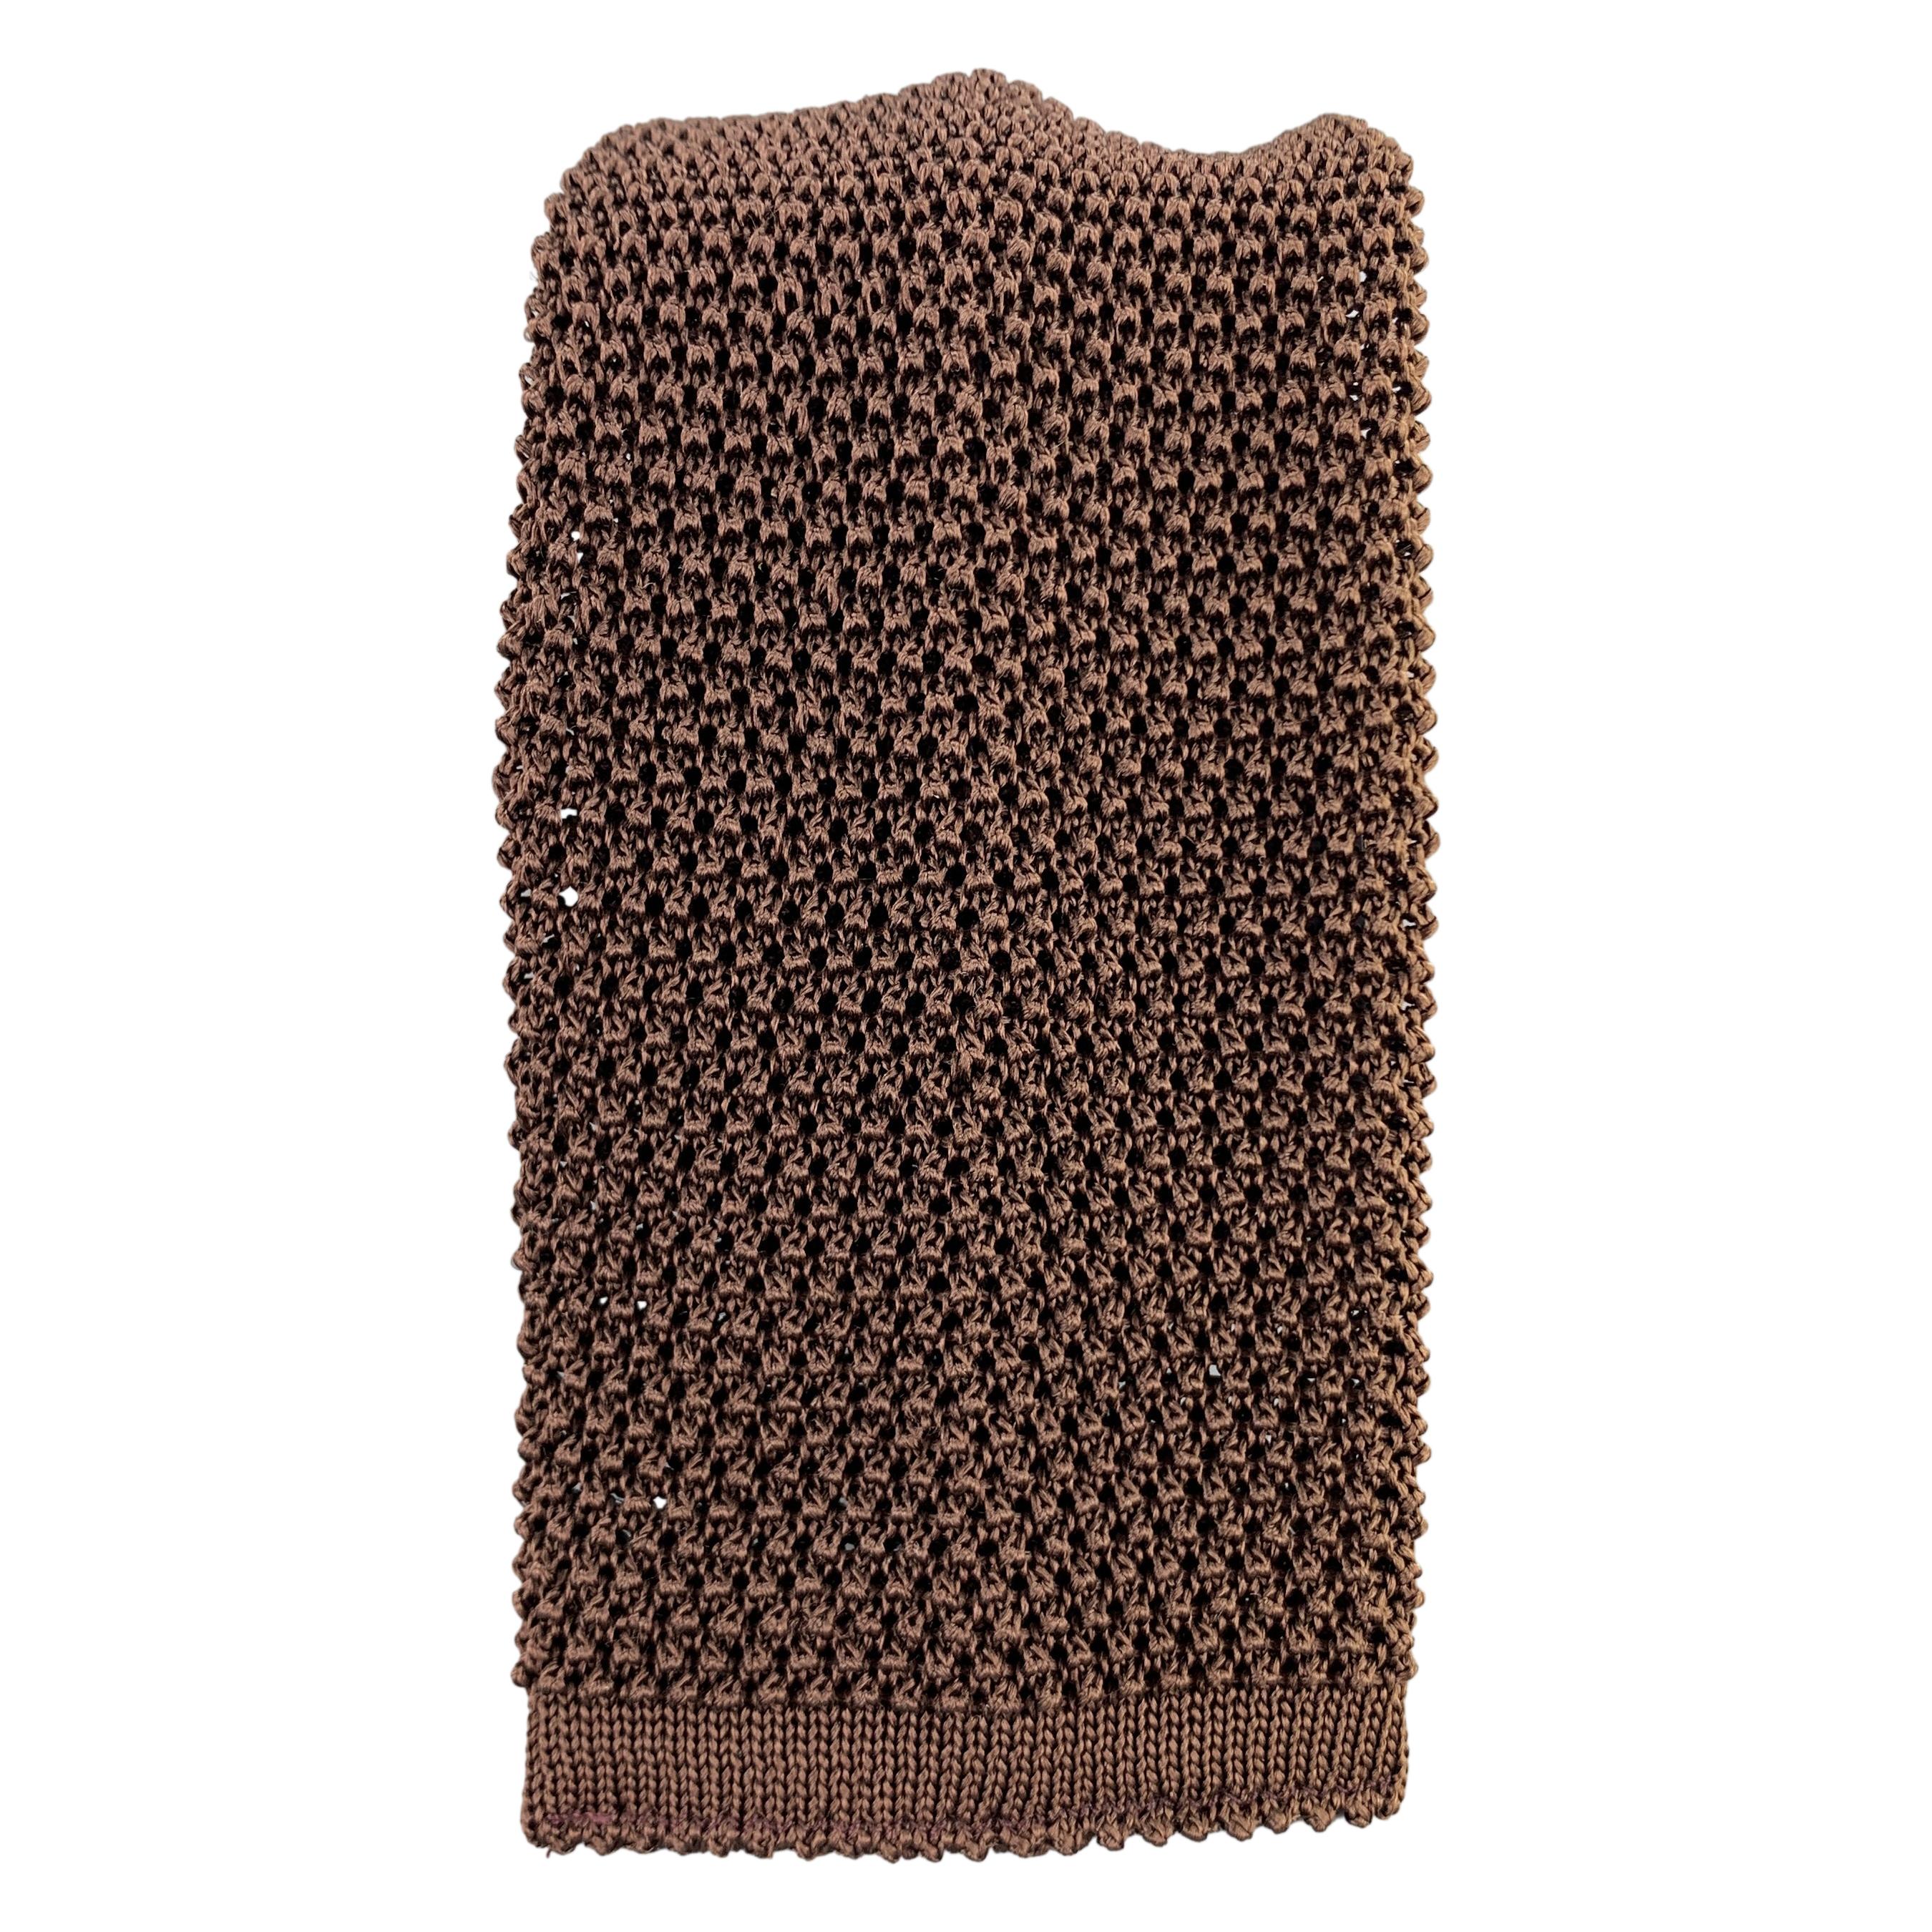 NEW & LINGWOOD Chocolate Brown Silk Textured Knit Tie